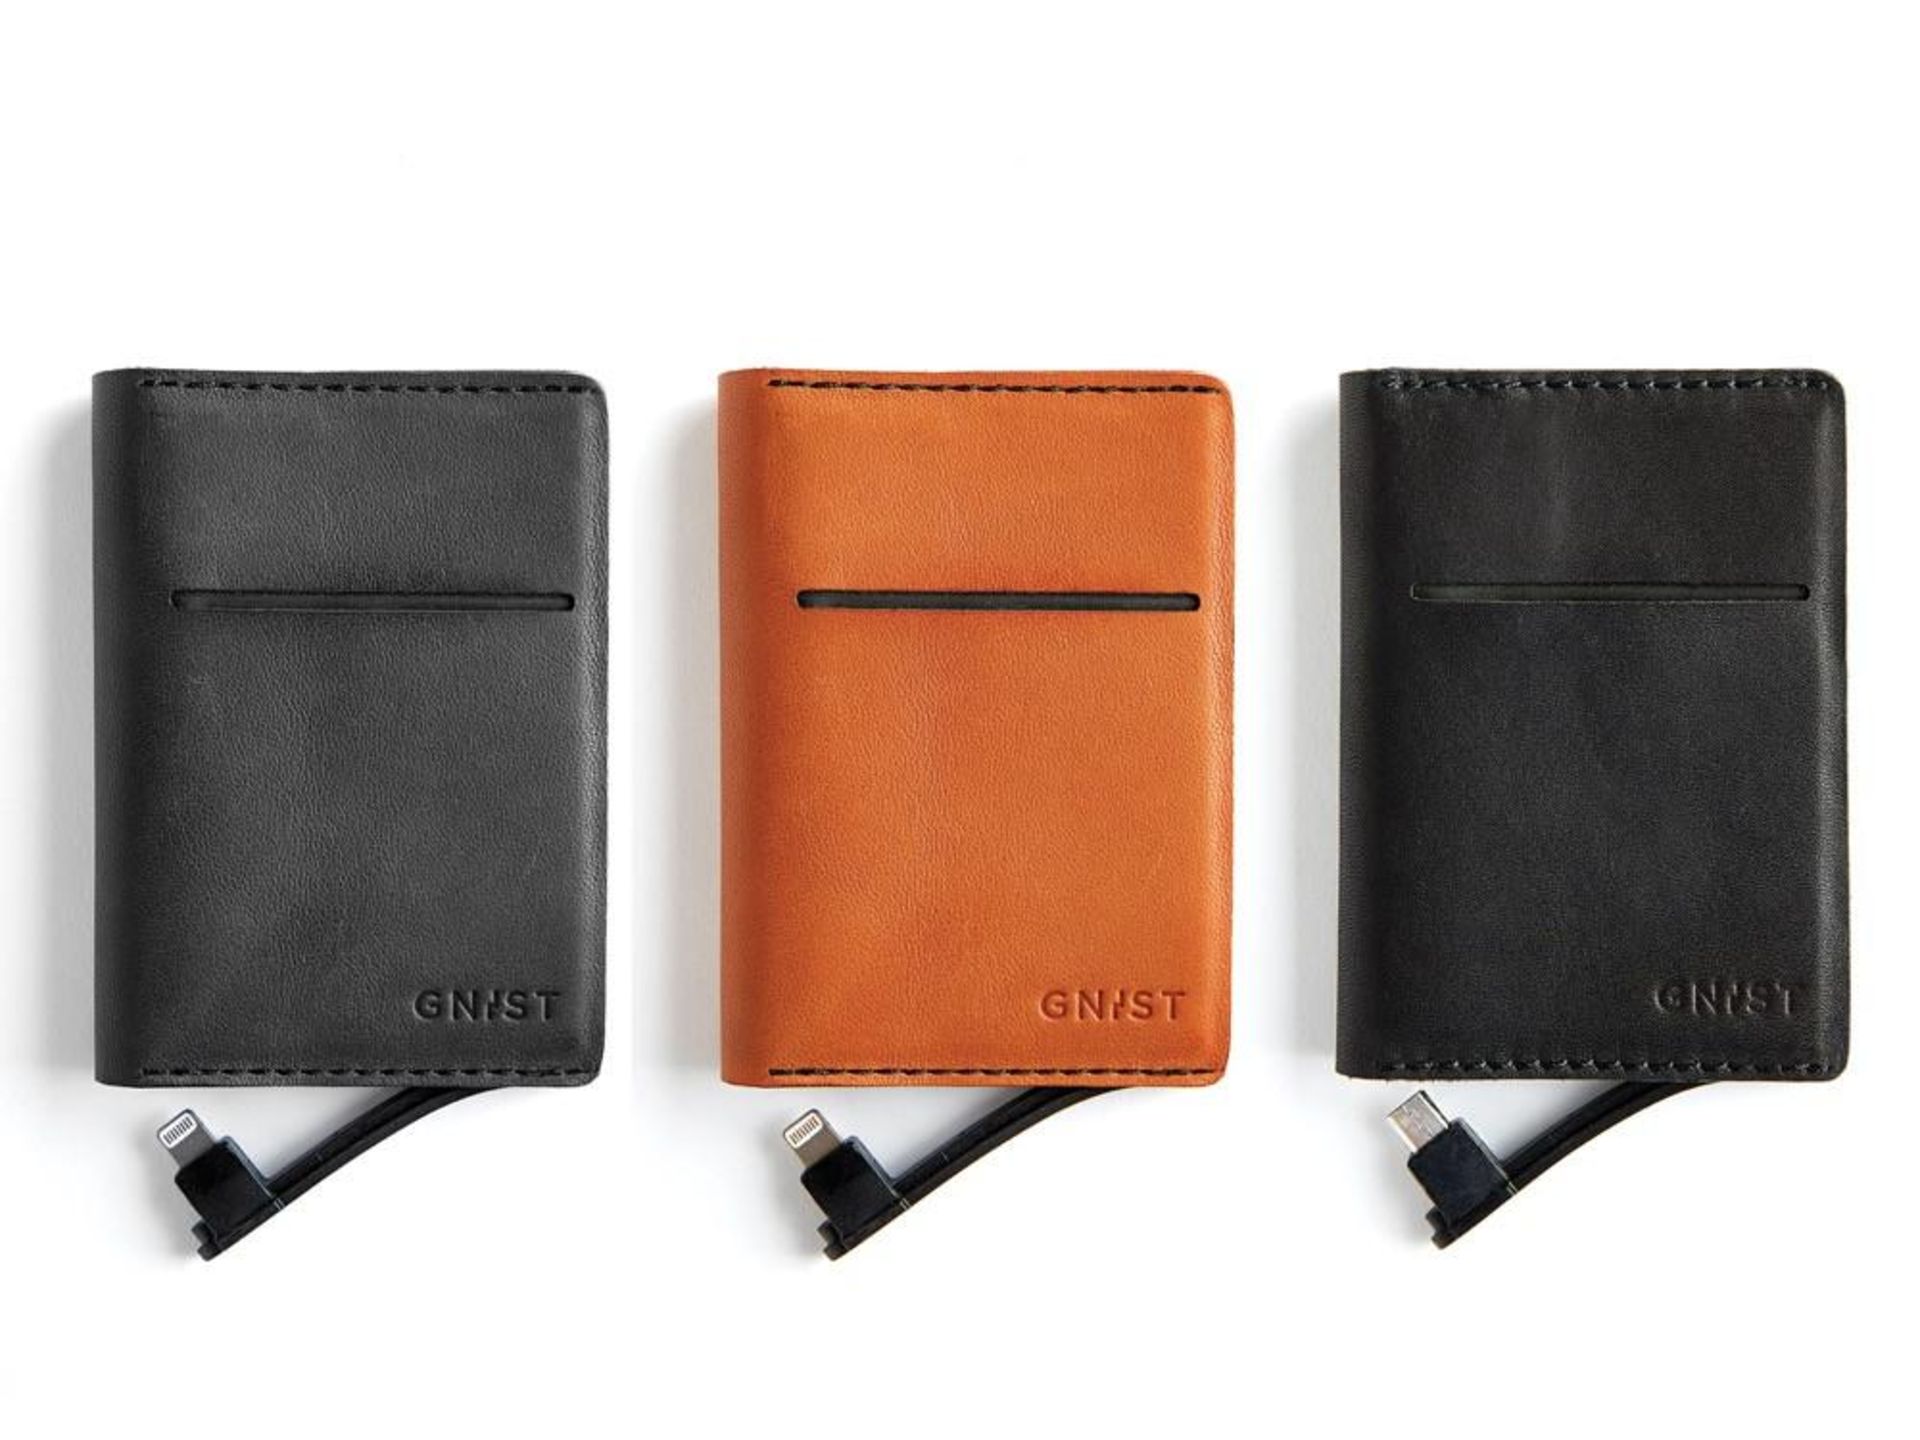 V Brand New Phone Charging Wallet - £59.00 (Unikia) - Genuine Aniline Leather - Holds 6 Cards & Cash